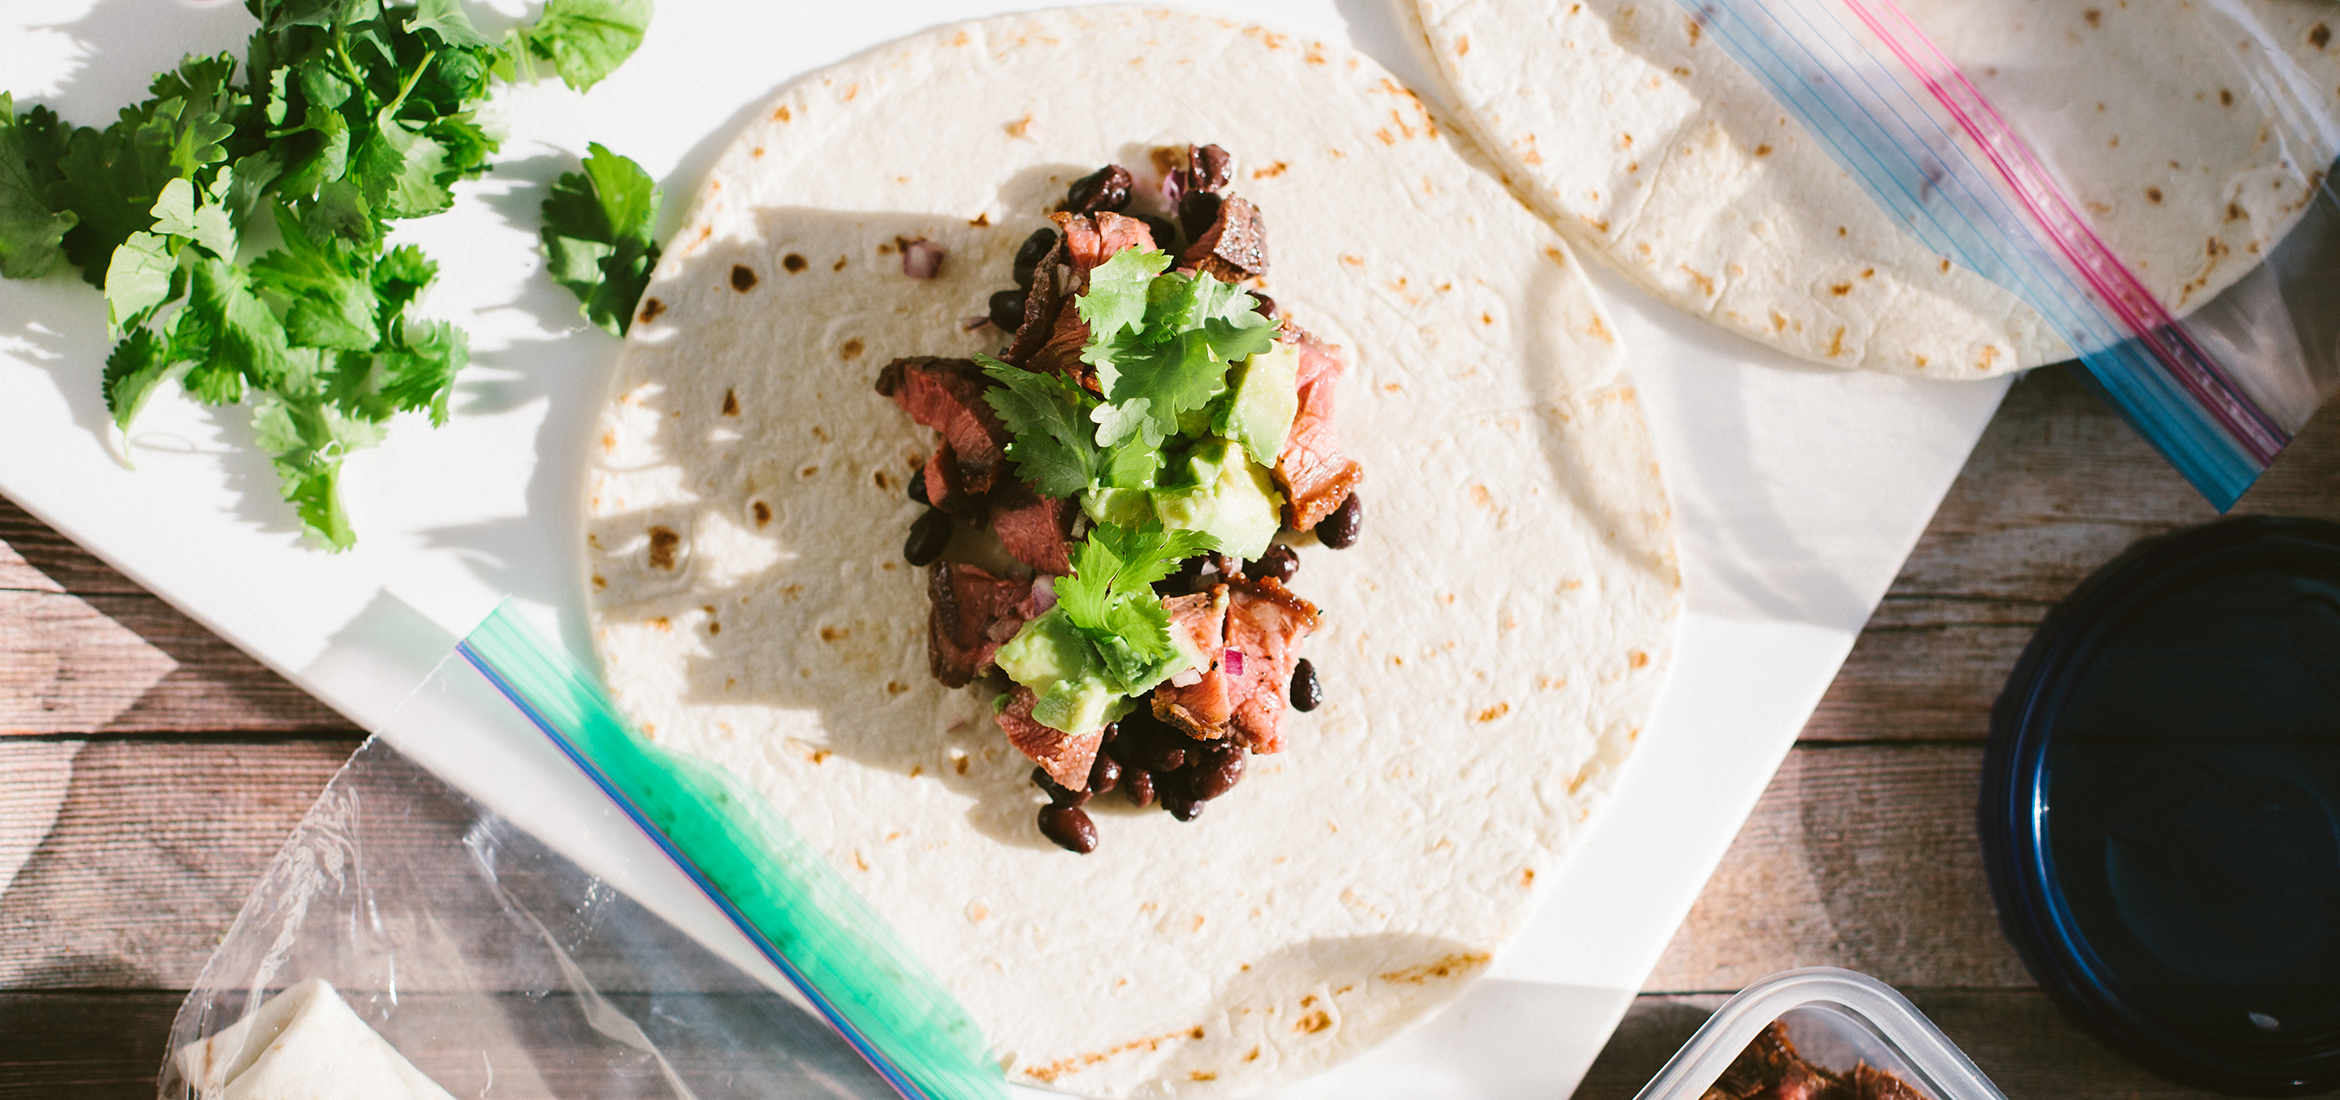 Steak and Black Bean Burritos with Red Onion and Avocado